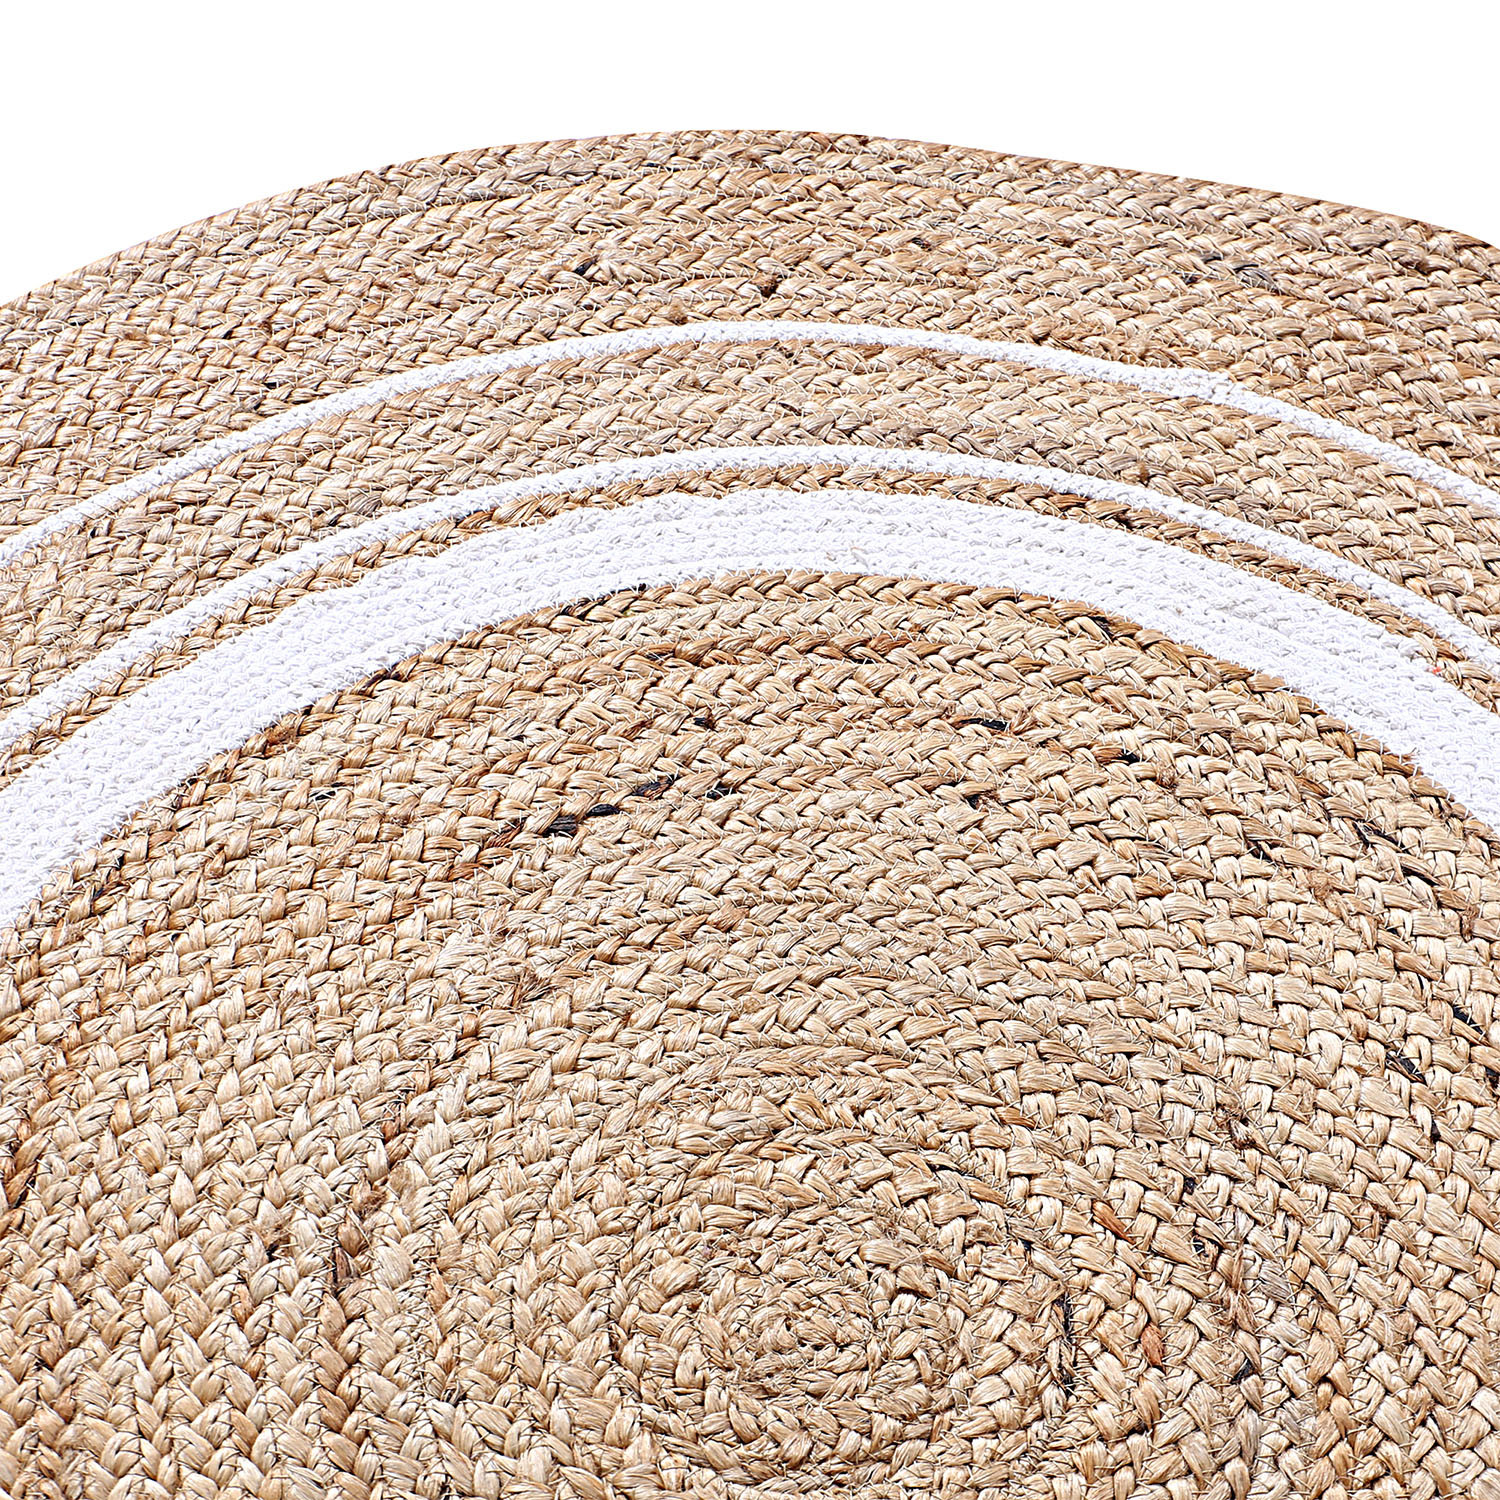 Kuber Industries Hand Woven Braided Carpet Rugs|Round Traditional Spiral Design Jute Door mat|Mat For Bedroom,Living Room,Dining Room,Yoga,60x60 cm,(White)